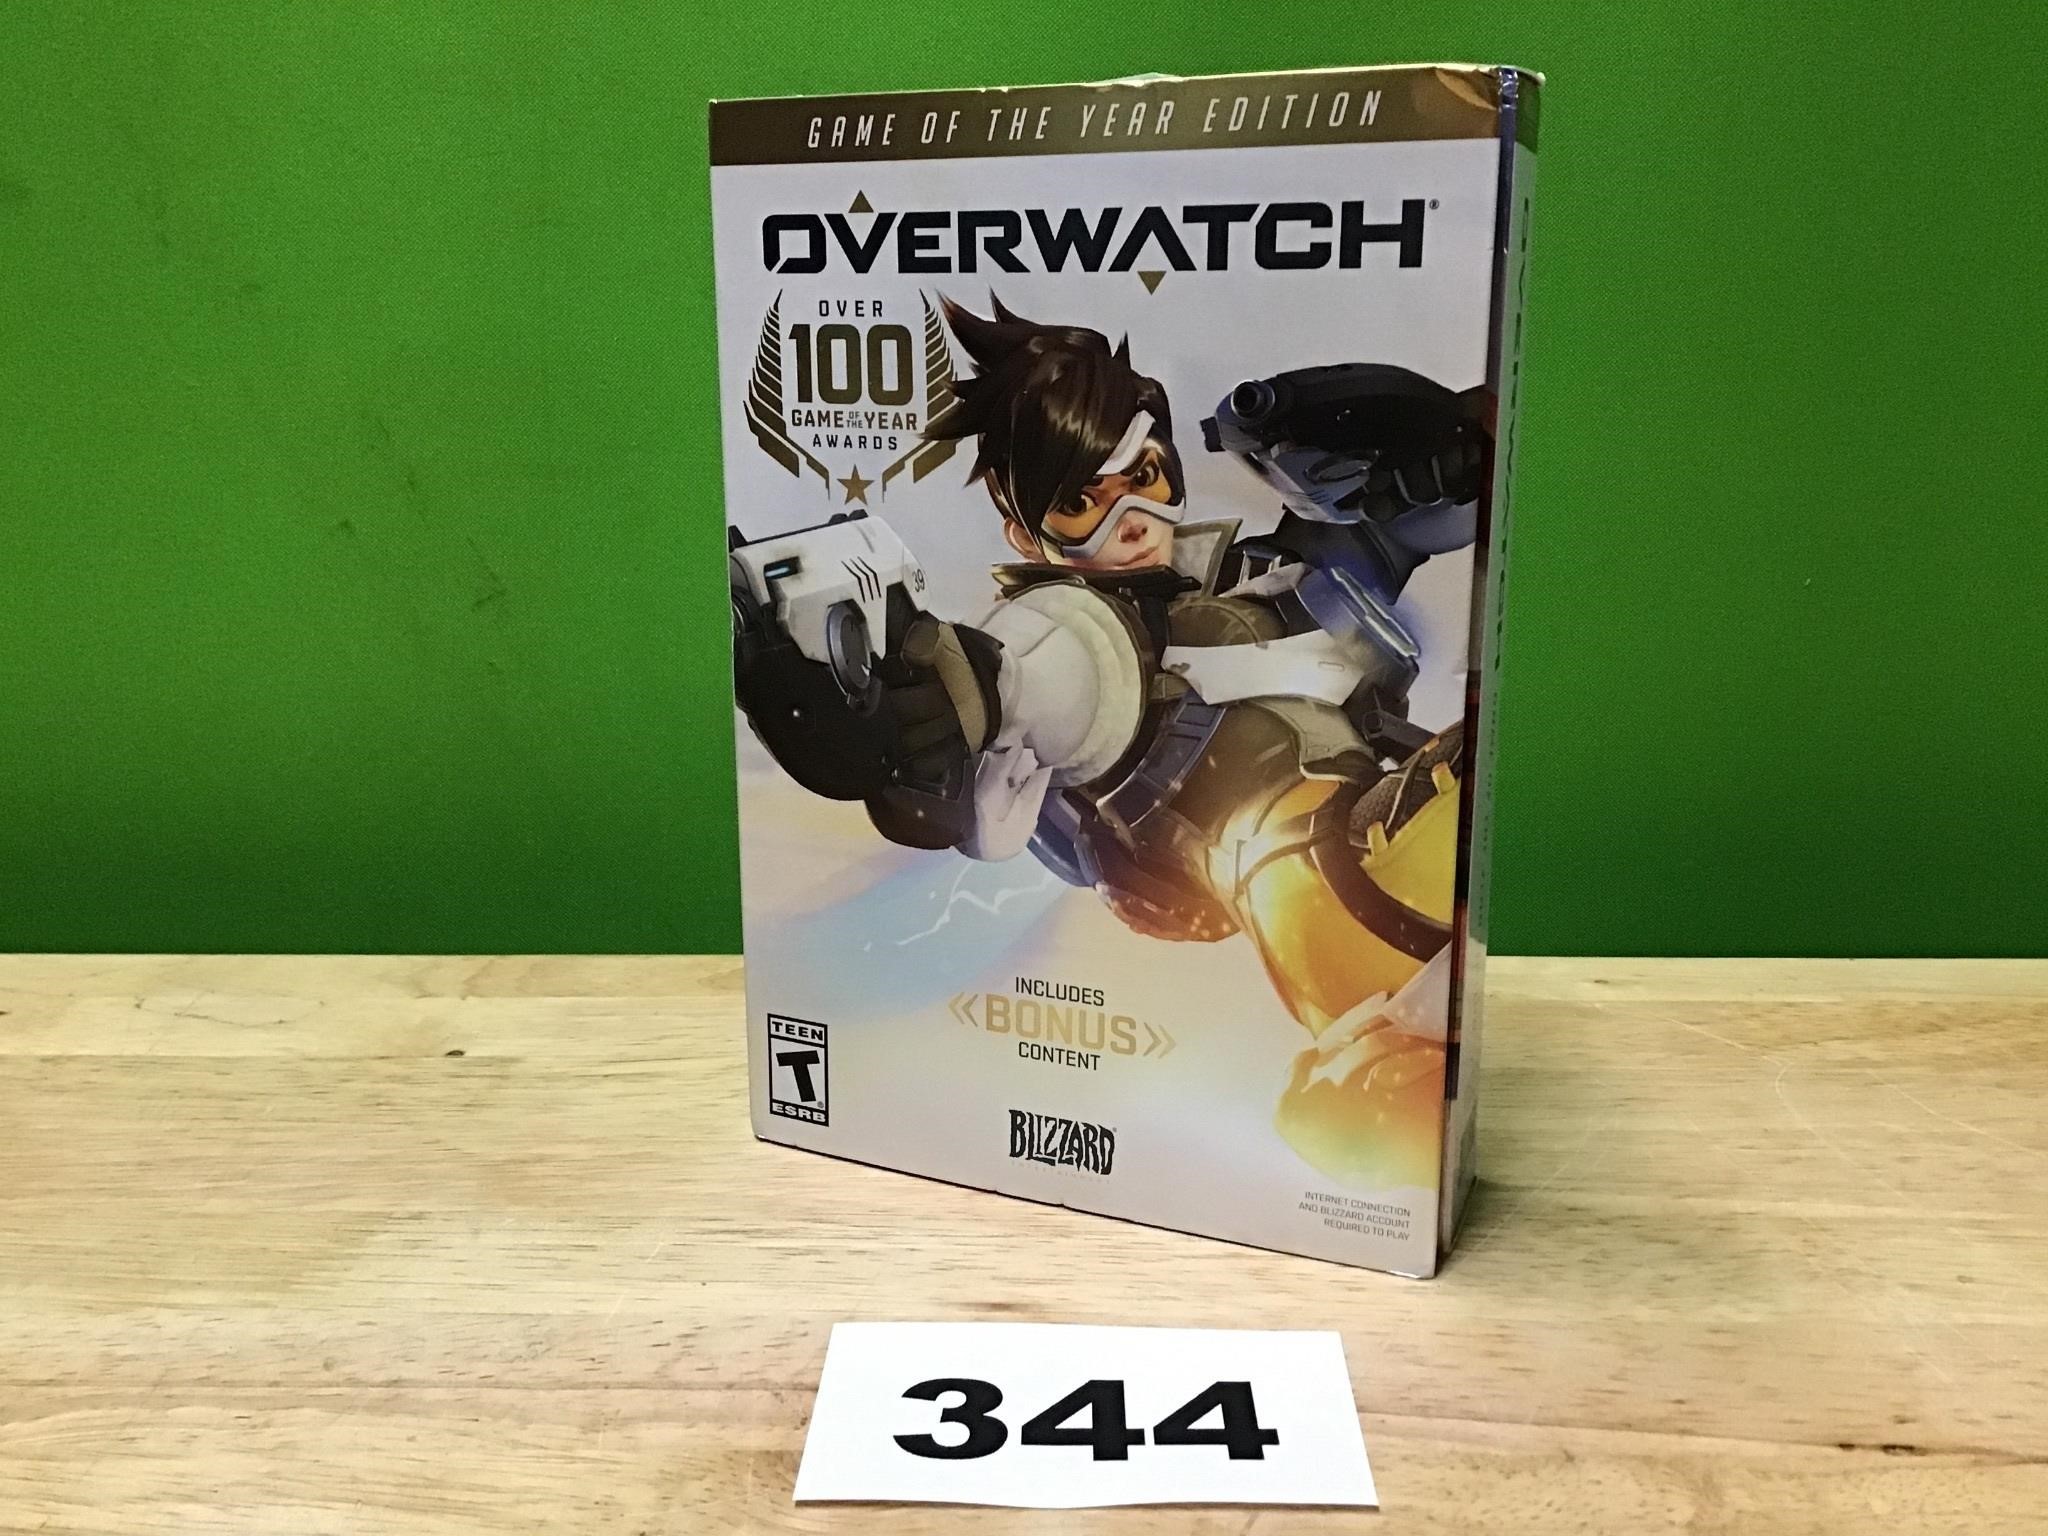 Overwatch Game of the Year Edition for Windows